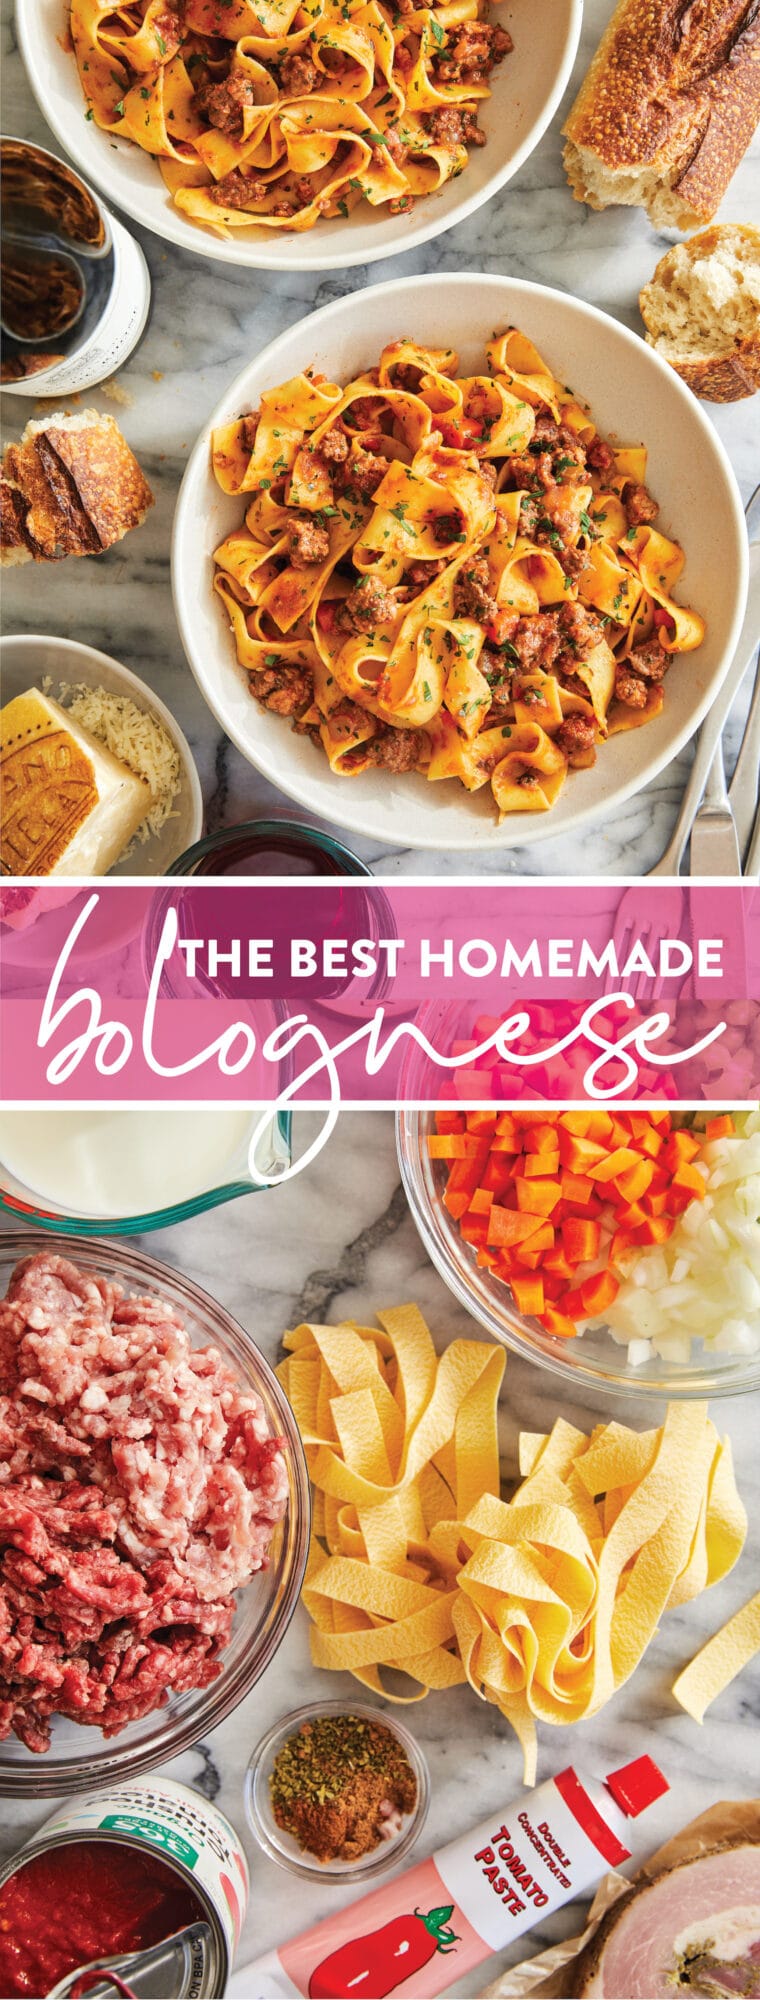 The Best Homemade Bolognese - THE VERY best (freezer-friendly) bolognese sauce! So rich, so hearty, so perfect. Serve over pasta or gnocchi! 